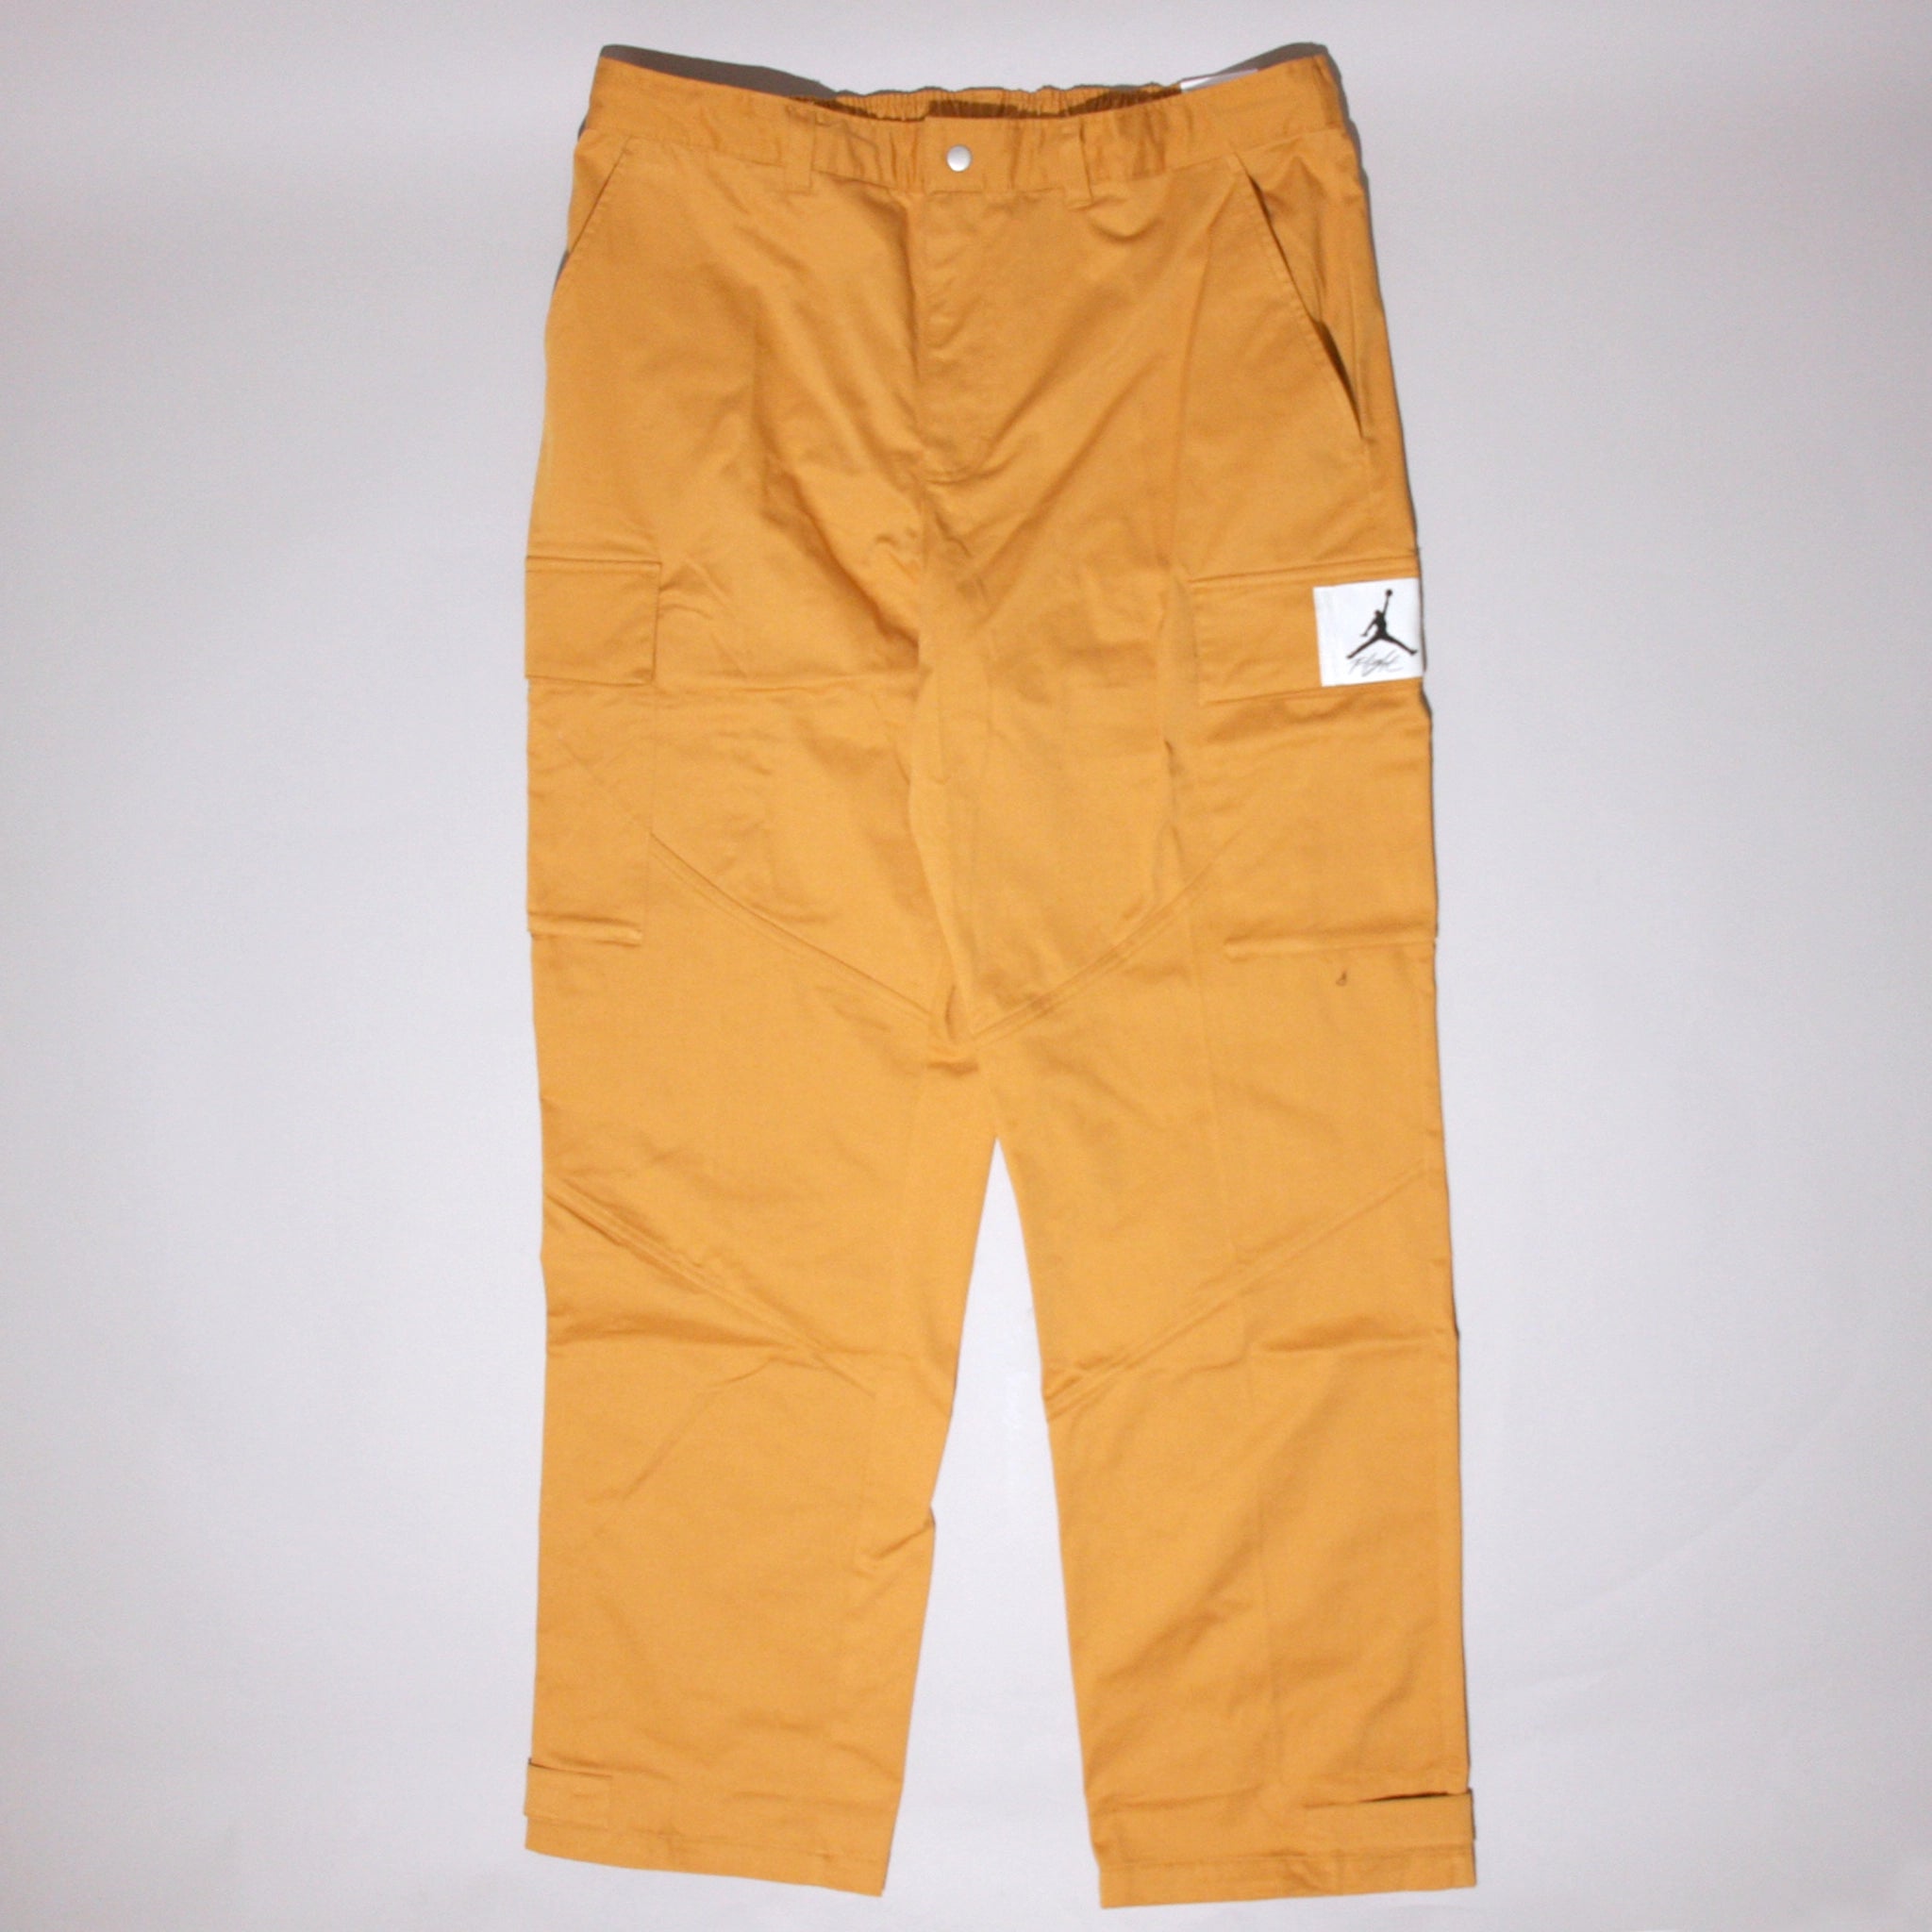 In Search of these Jordan Cargo Pants. : r/DHgate